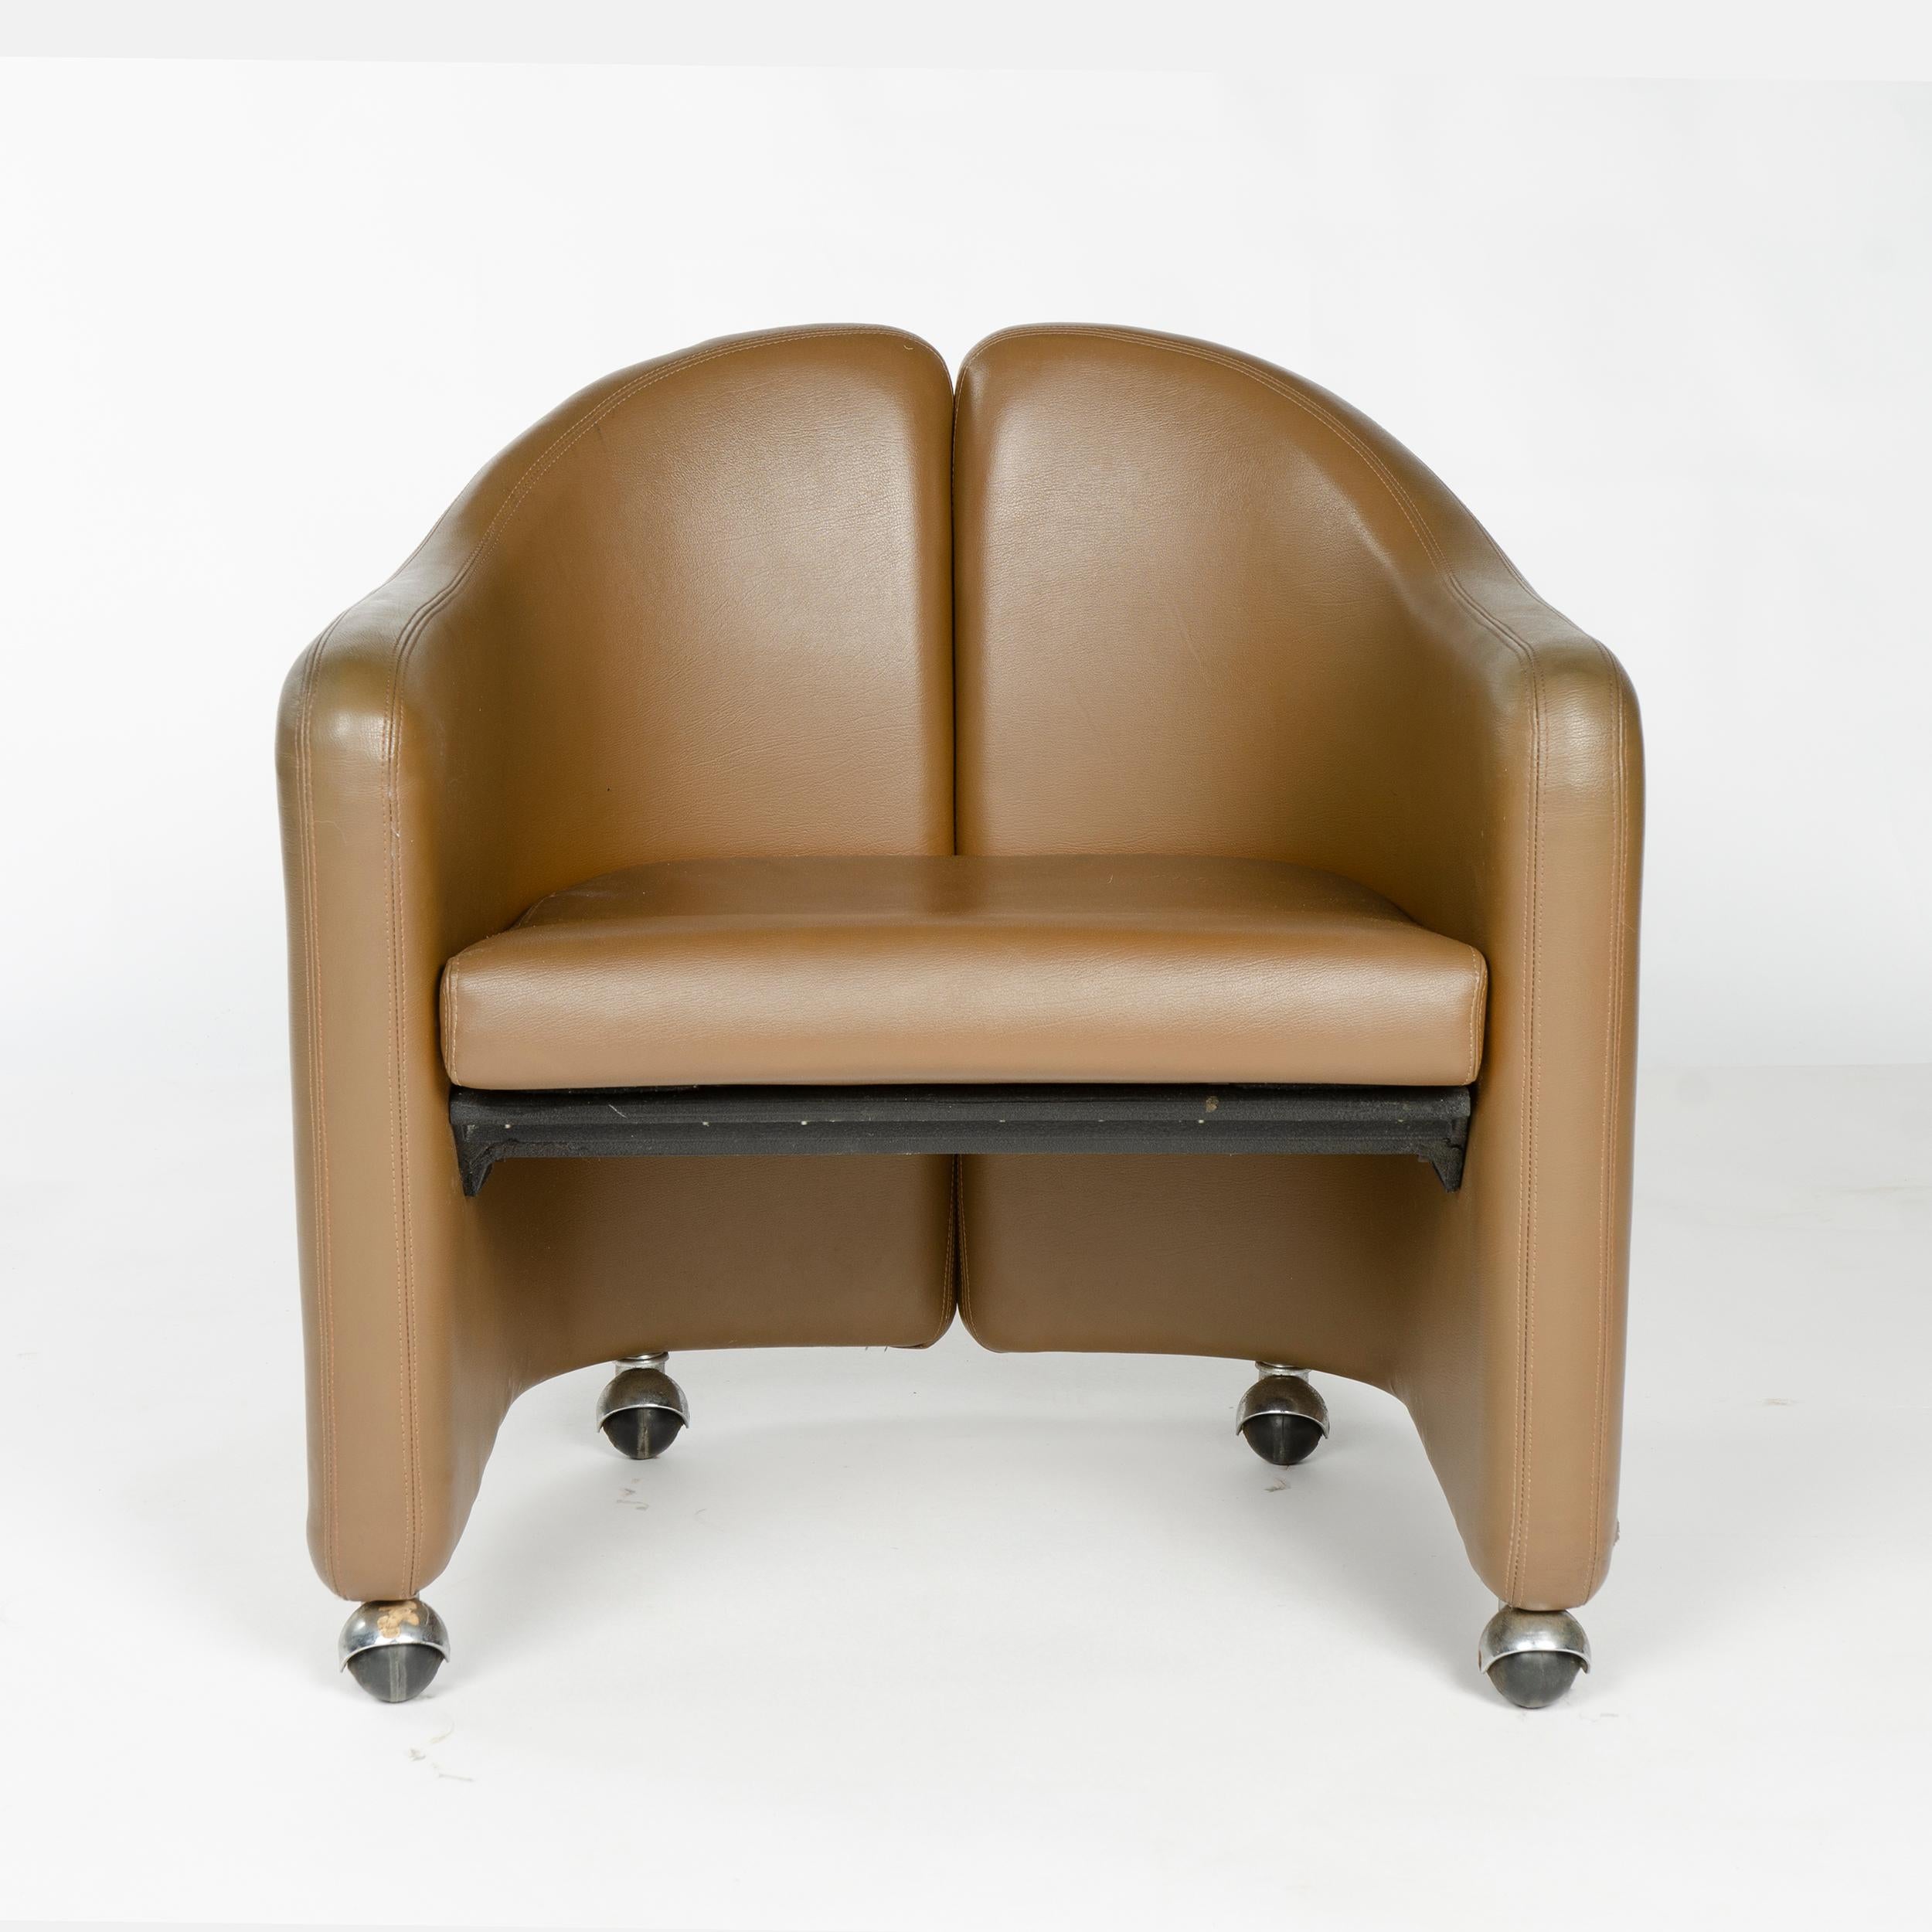 1970s Italian Barrel-Back Desk or Cocktail Chair by Eugenio Gerli for Tecno In Good Condition For Sale In Sagaponack, NY